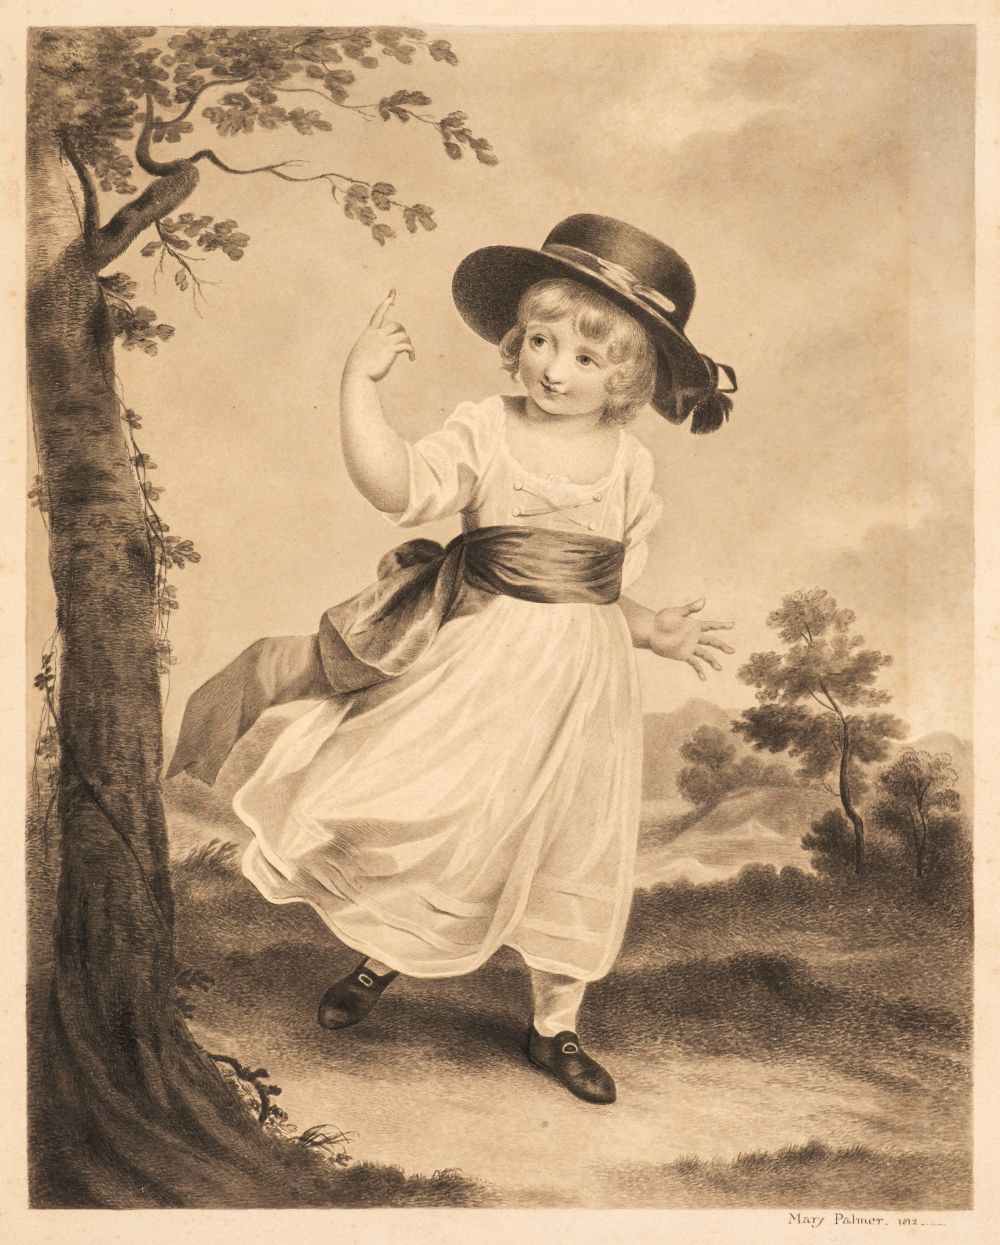 * Palmer (Mary, early 19th century). Young boy in hat ... skipping in a wooded landscape, 1812